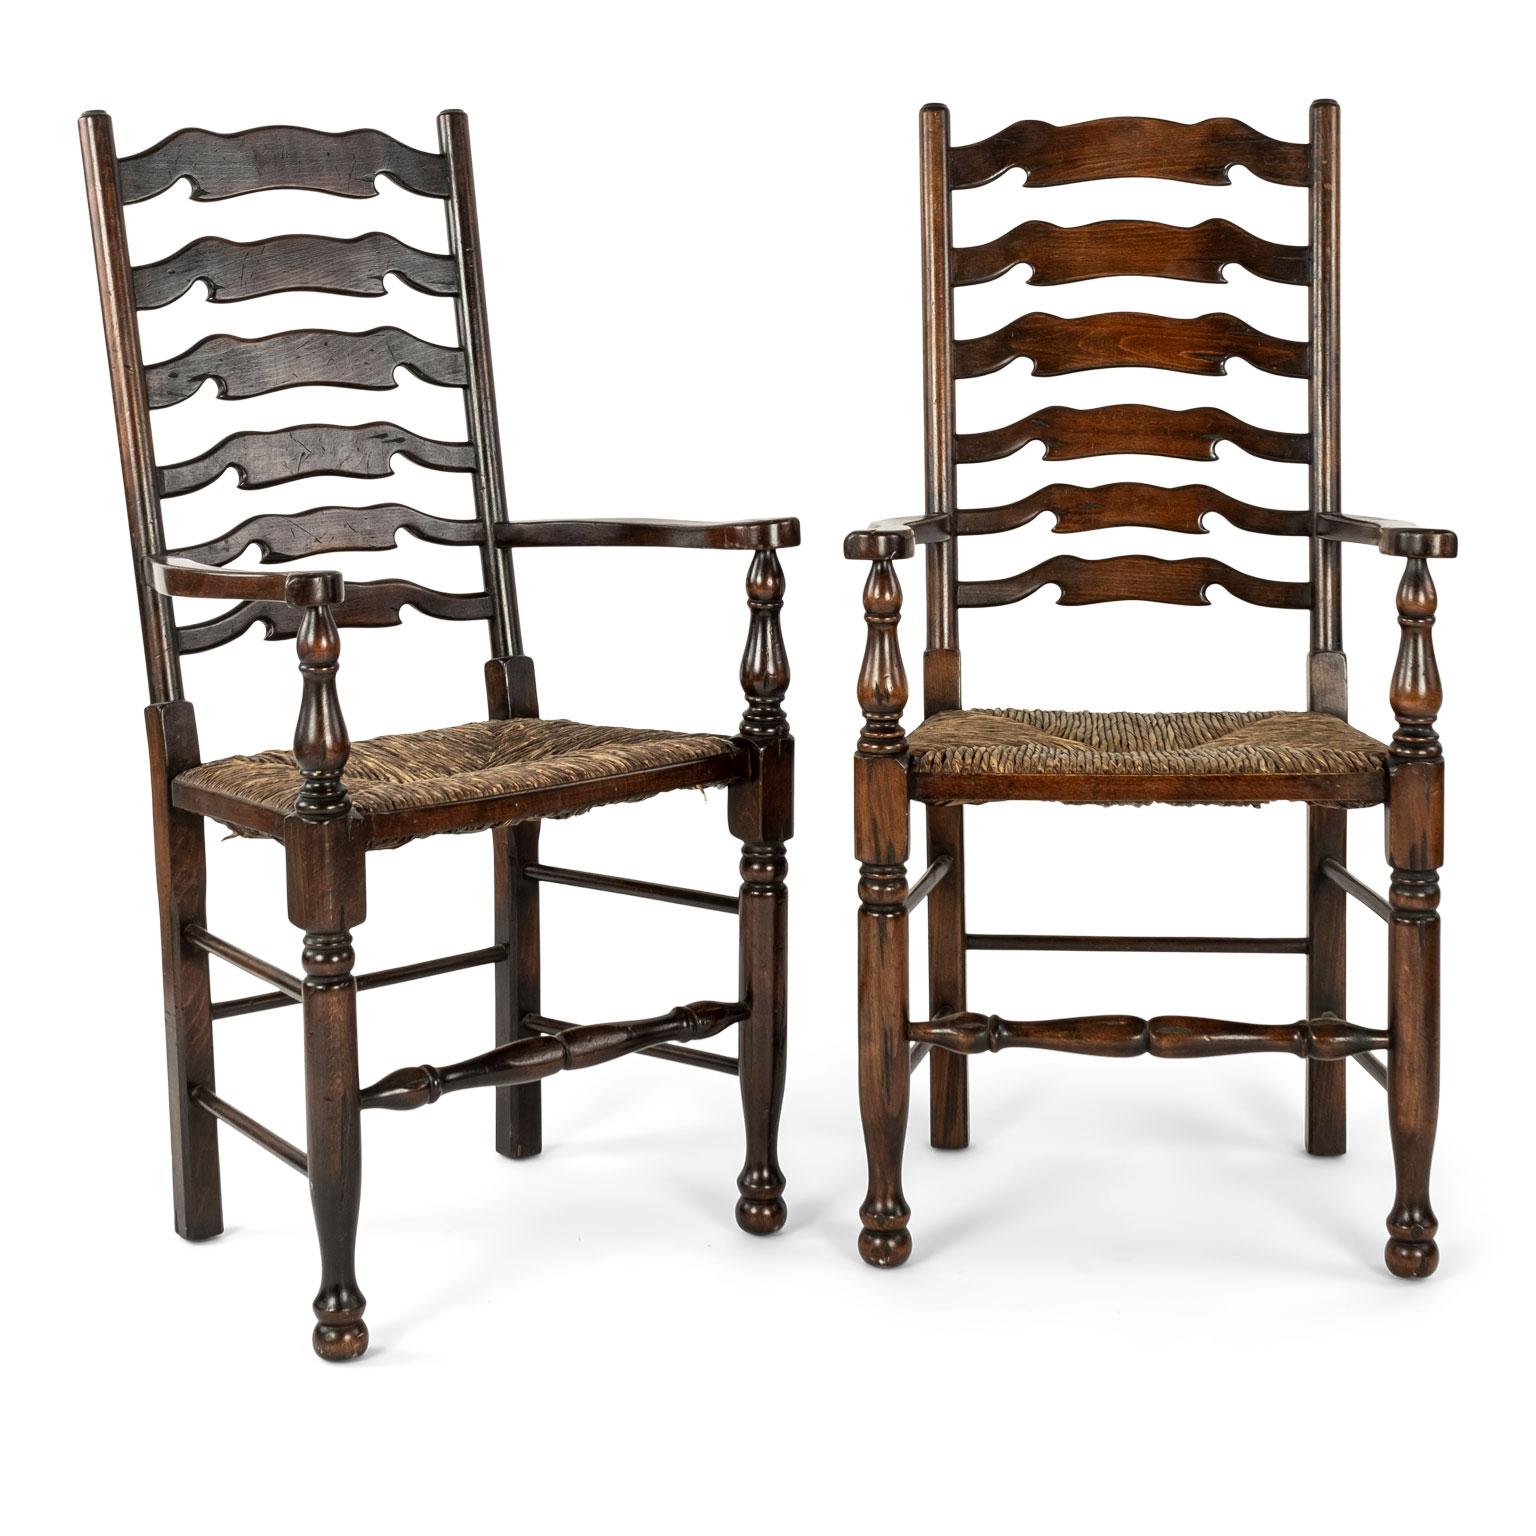 Set of eight vintage ladderback chairs: six side chairs and two complimentary armchairs. Turned and carved with rush seats and constructed with mortise and tenon and pegged joints. Sold together and priced $6,400.00 for the set.
 